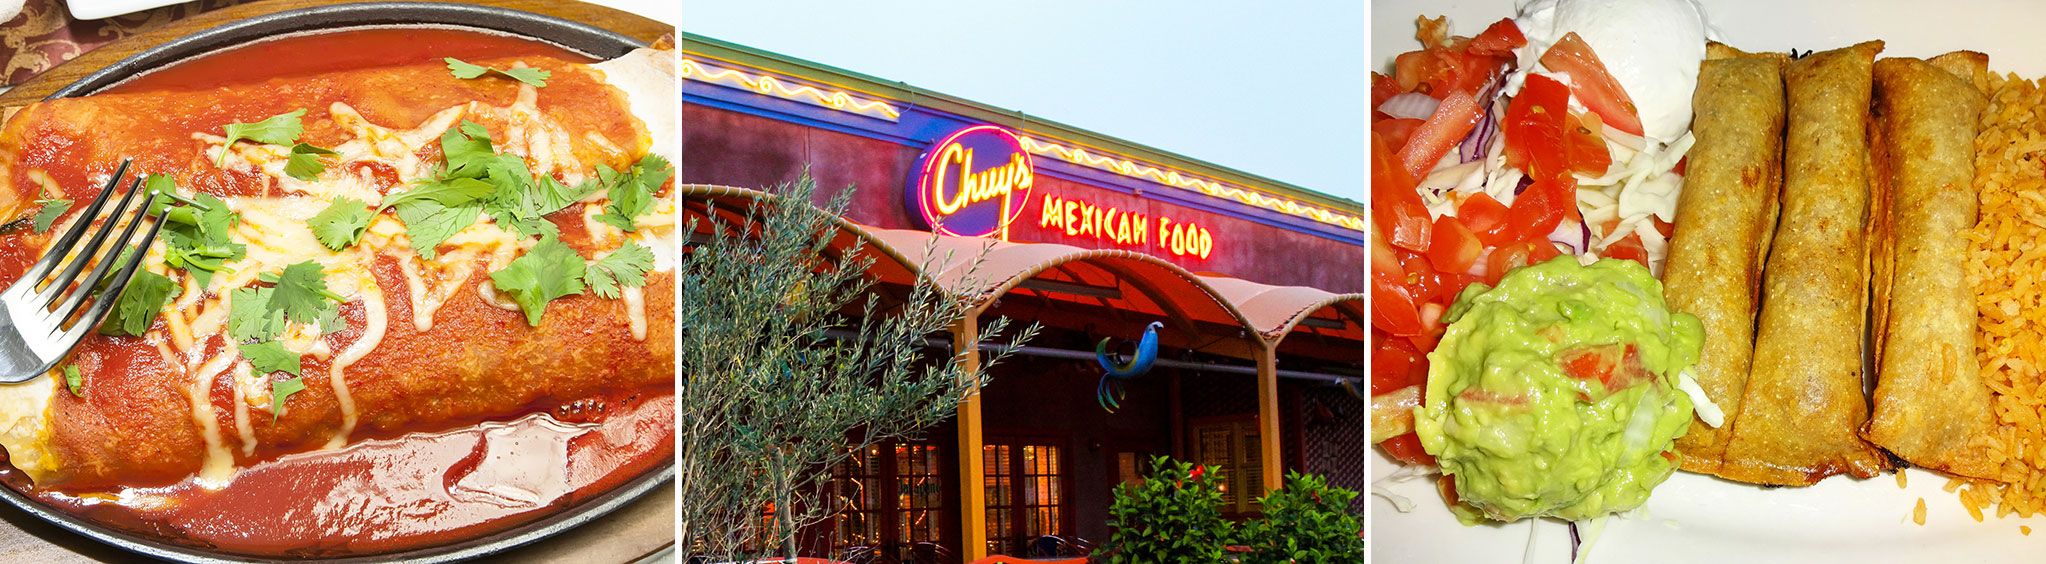 Chuy's Mexican Food at Opry Mills